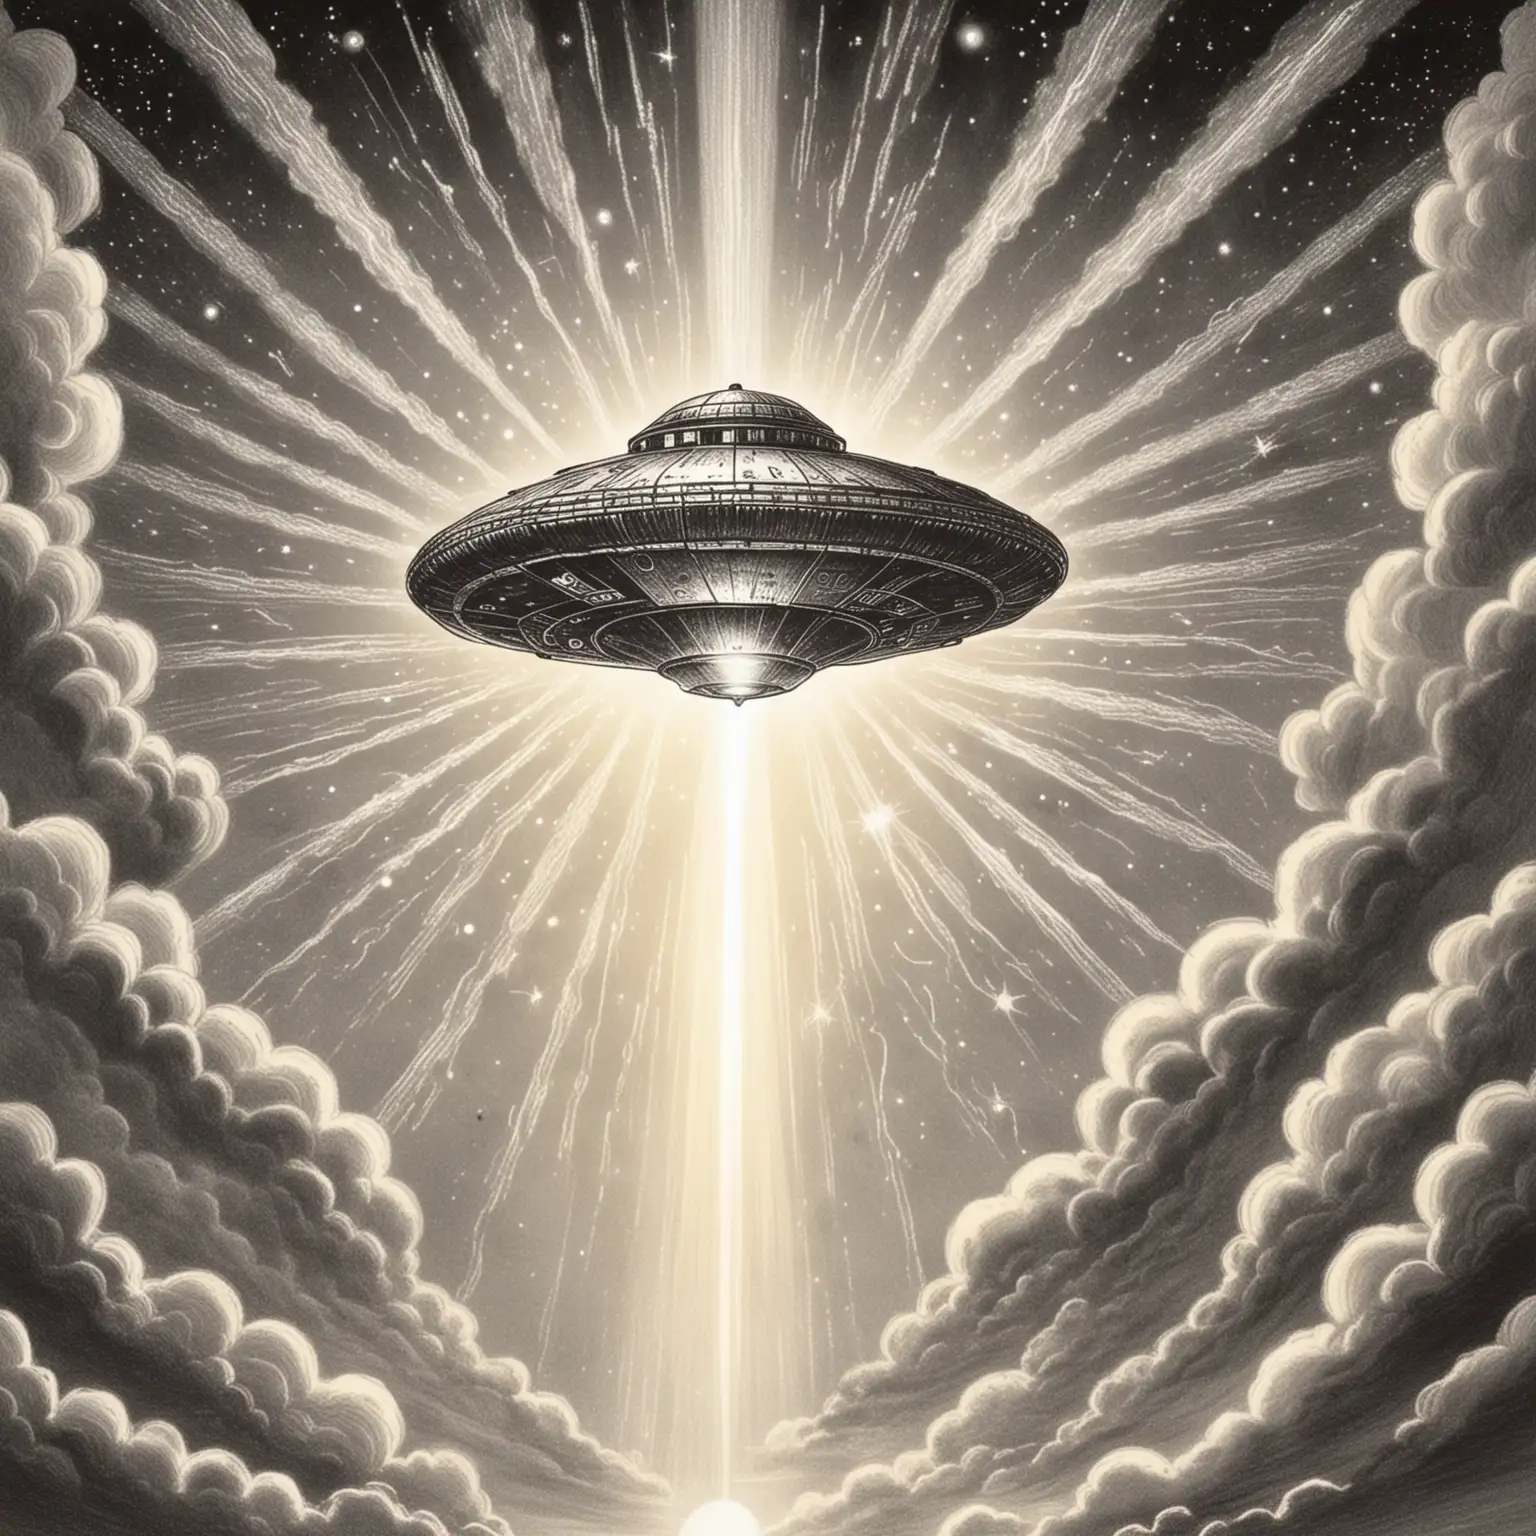 HandDrawn Ancient UFO with Celestial Beams